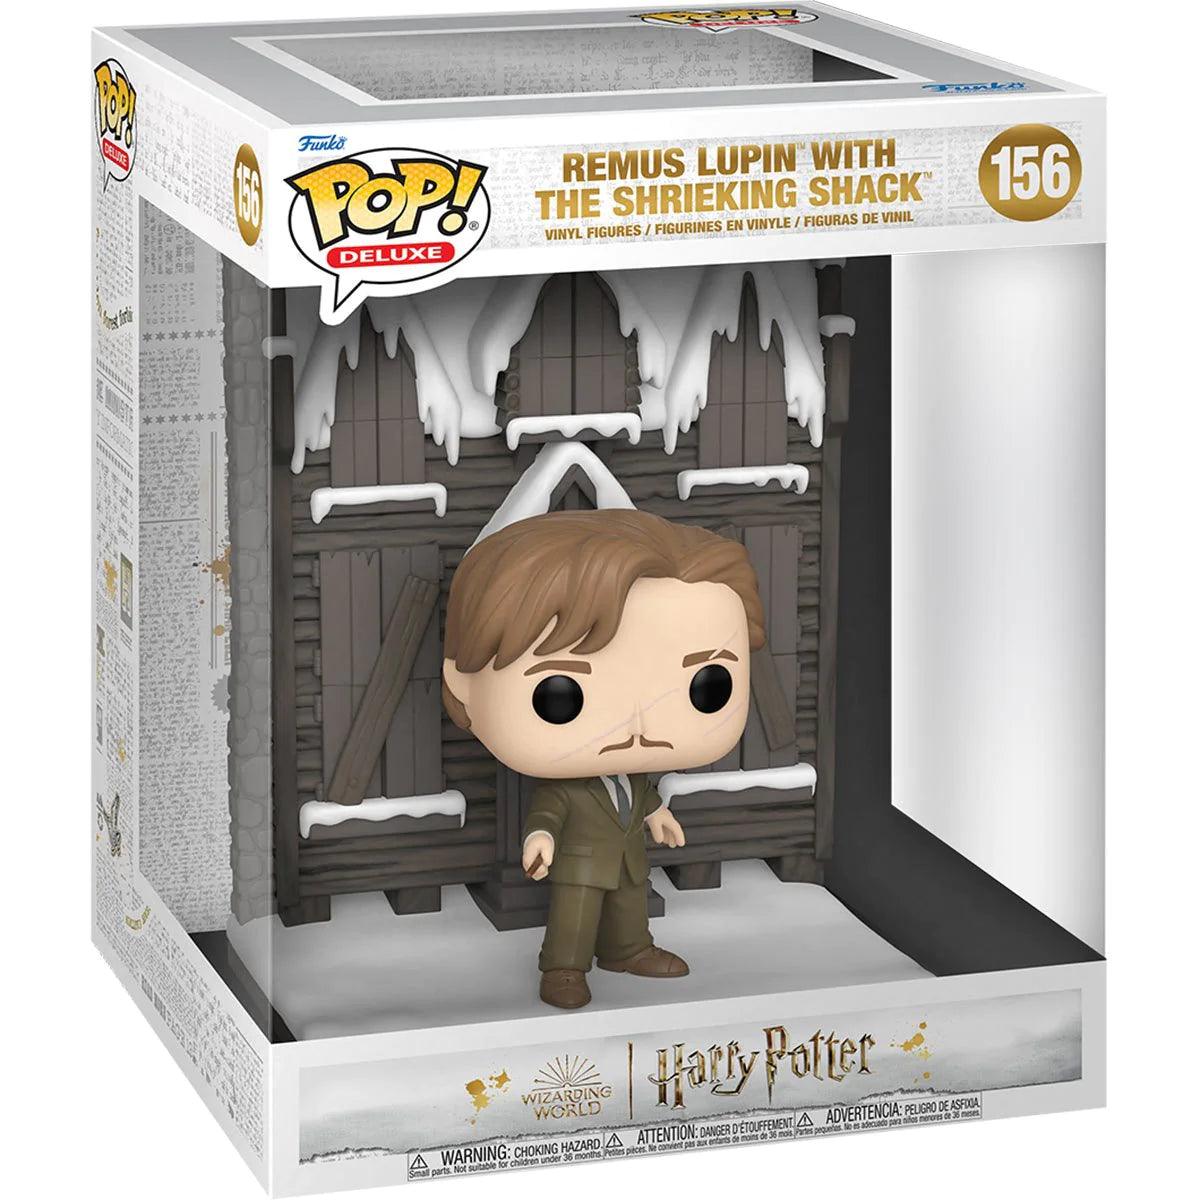 Pop! Deluxe - Harry Potter - Remus Lupin With The Shrieking Shack - #156 - Hobby Champion Inc